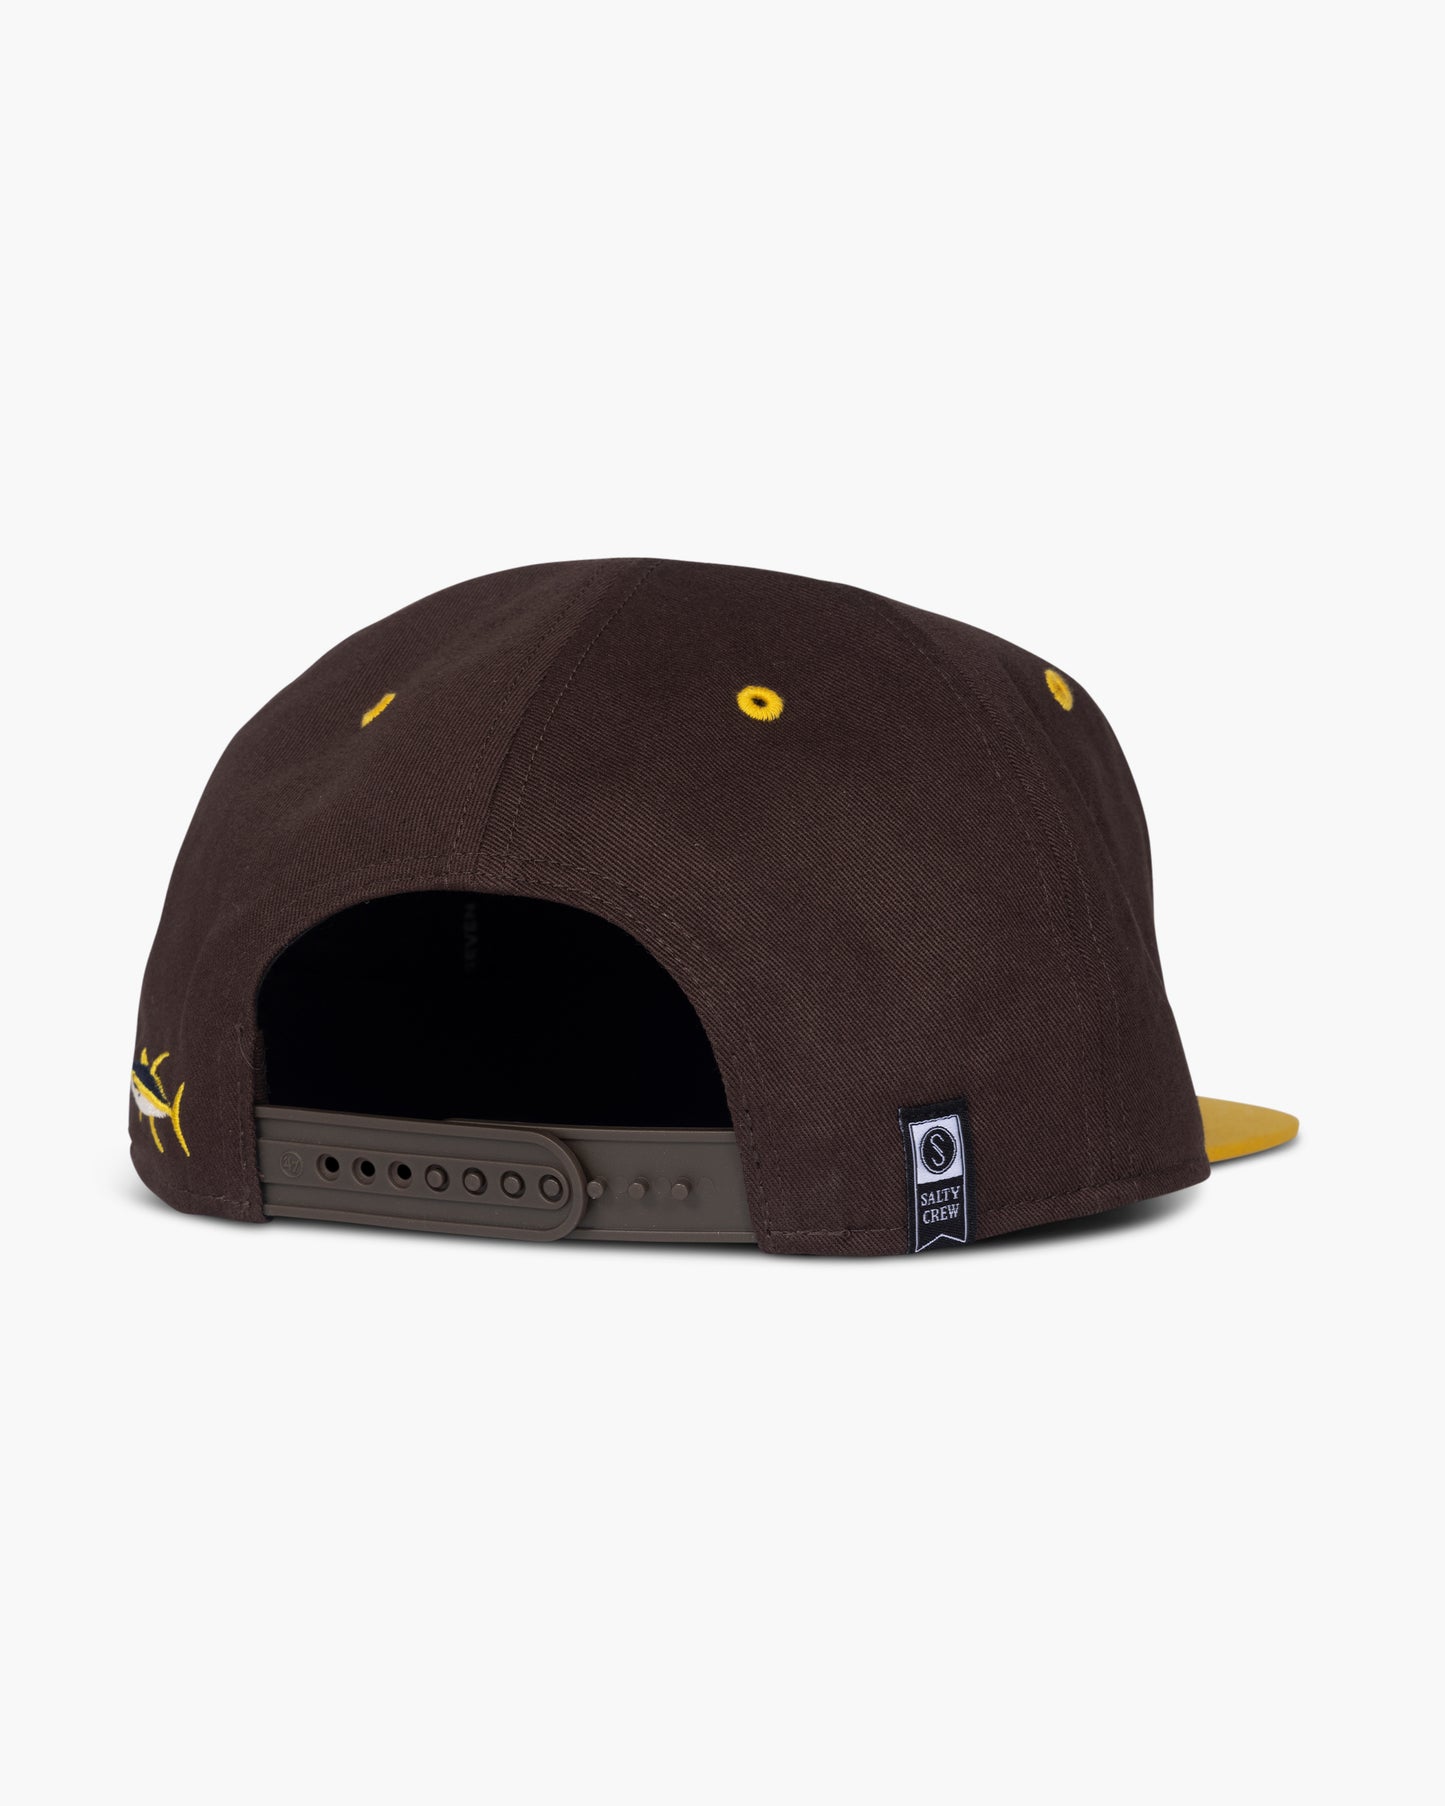 back view of Salty Crew x Padres x 47 Brown Unstructured Snapback